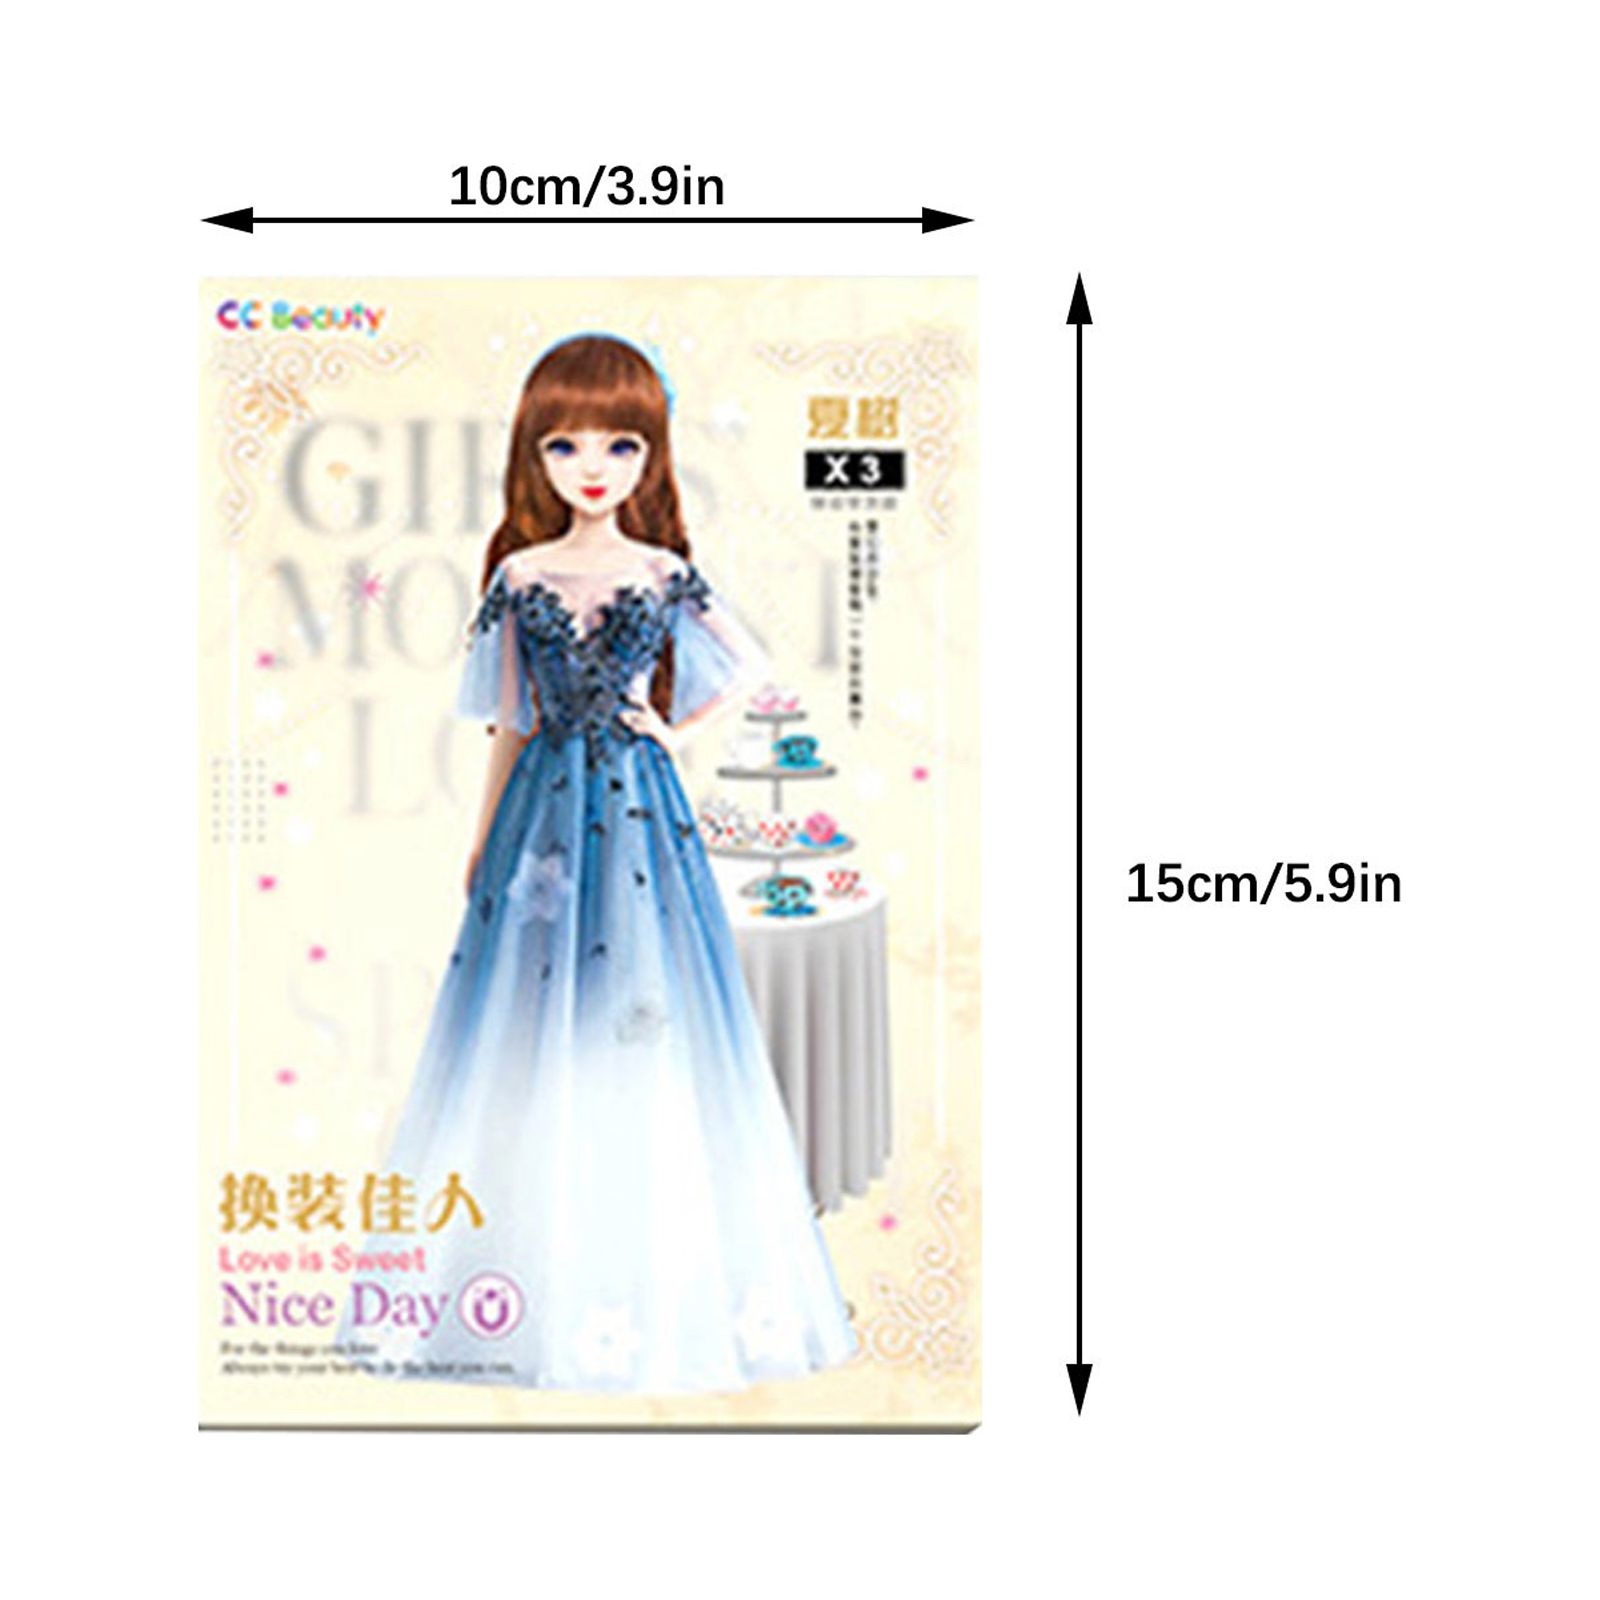 TUWABEII Games and Puzzles for Kids,Magnetic Dress Up Baby Magnetic Princess Dress Up Paper Doll Magnet Dress Up Pretend And Play Travel Playset Toy Magnetic Dress Up Dolls For Girls Kid's Gift - image 5 of 7